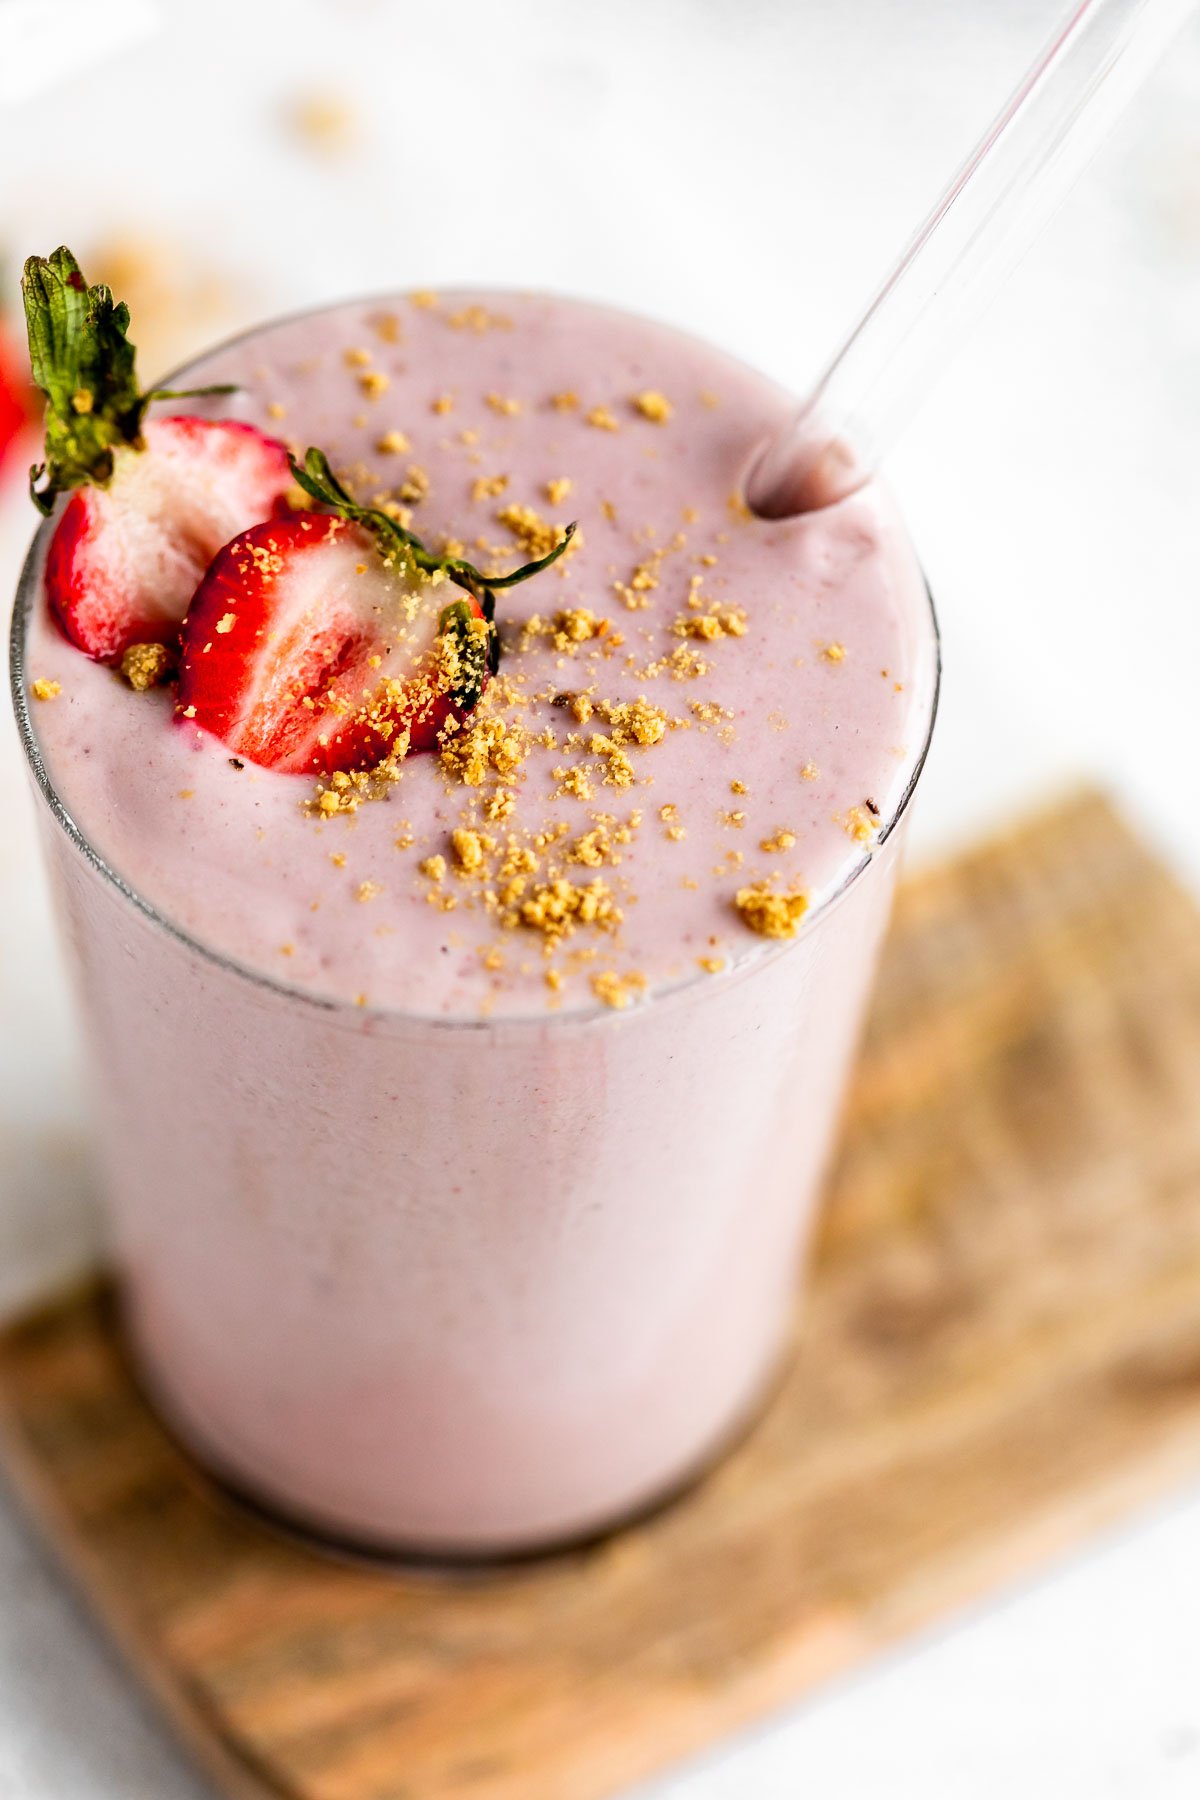 banana protein shake in a cup with berries